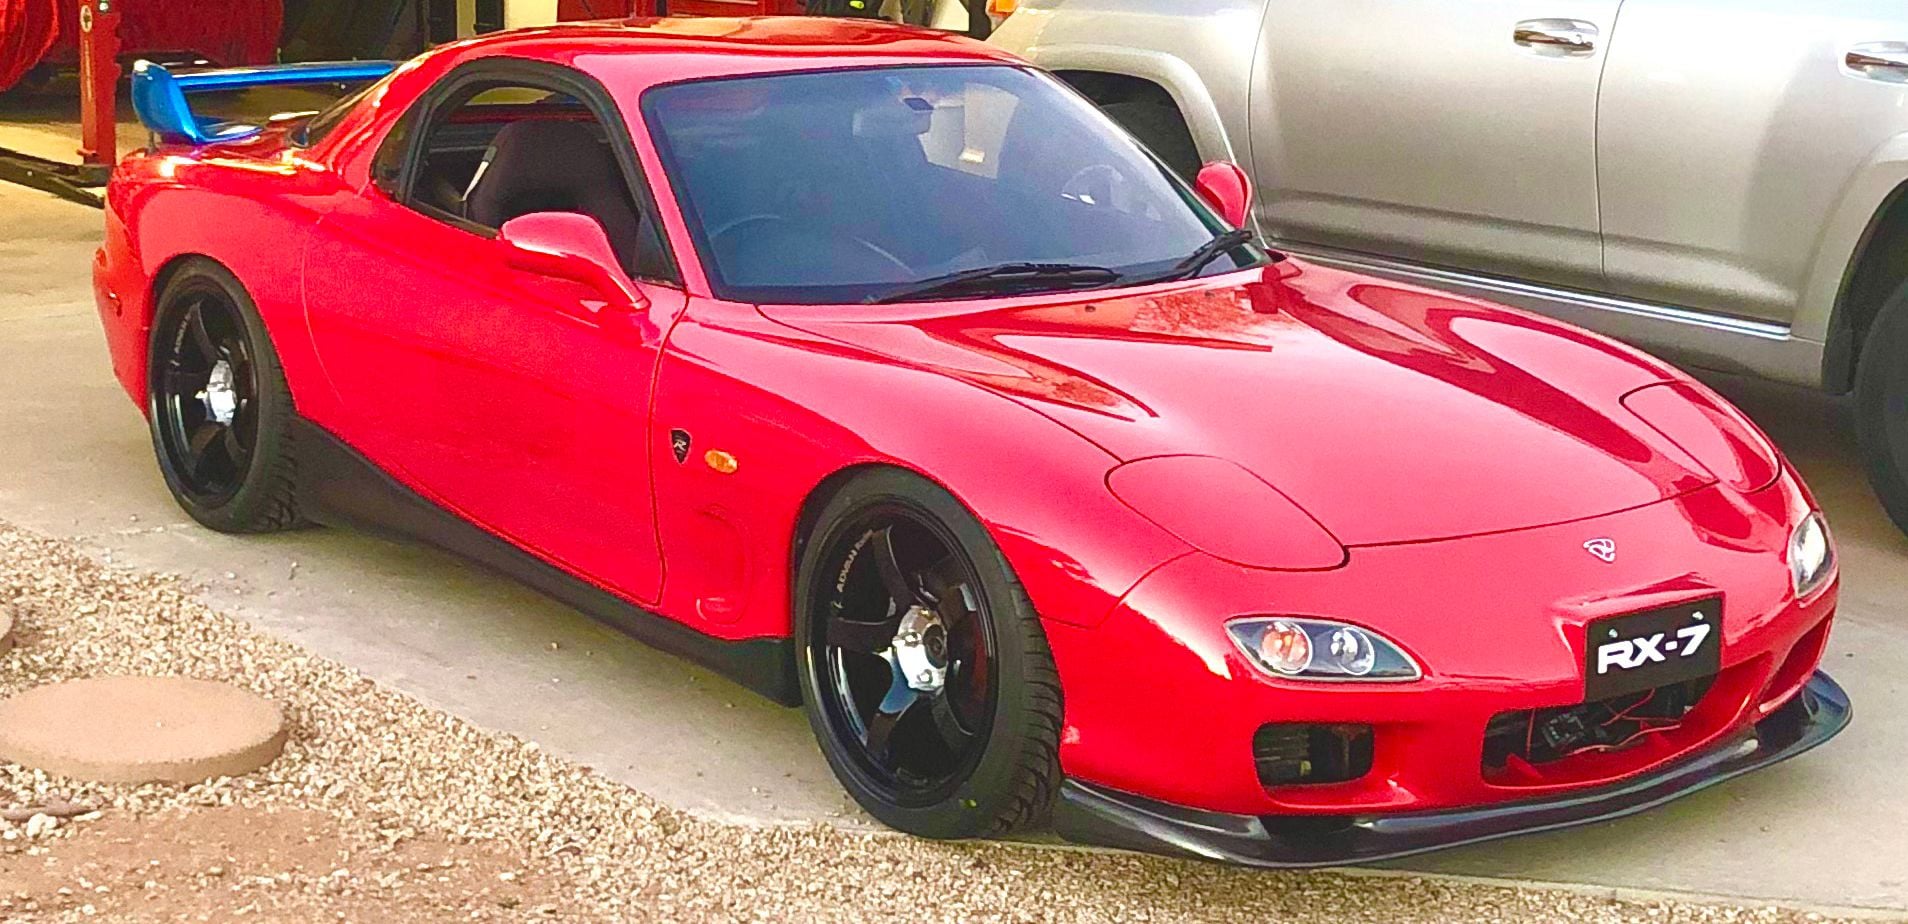 Exterior Body Parts - ShineAuto 99 spec front lip - carbon/twill - Used - 1993 to 2002 Mazda RX-7 - Scottsdale, AZ 85254, United States